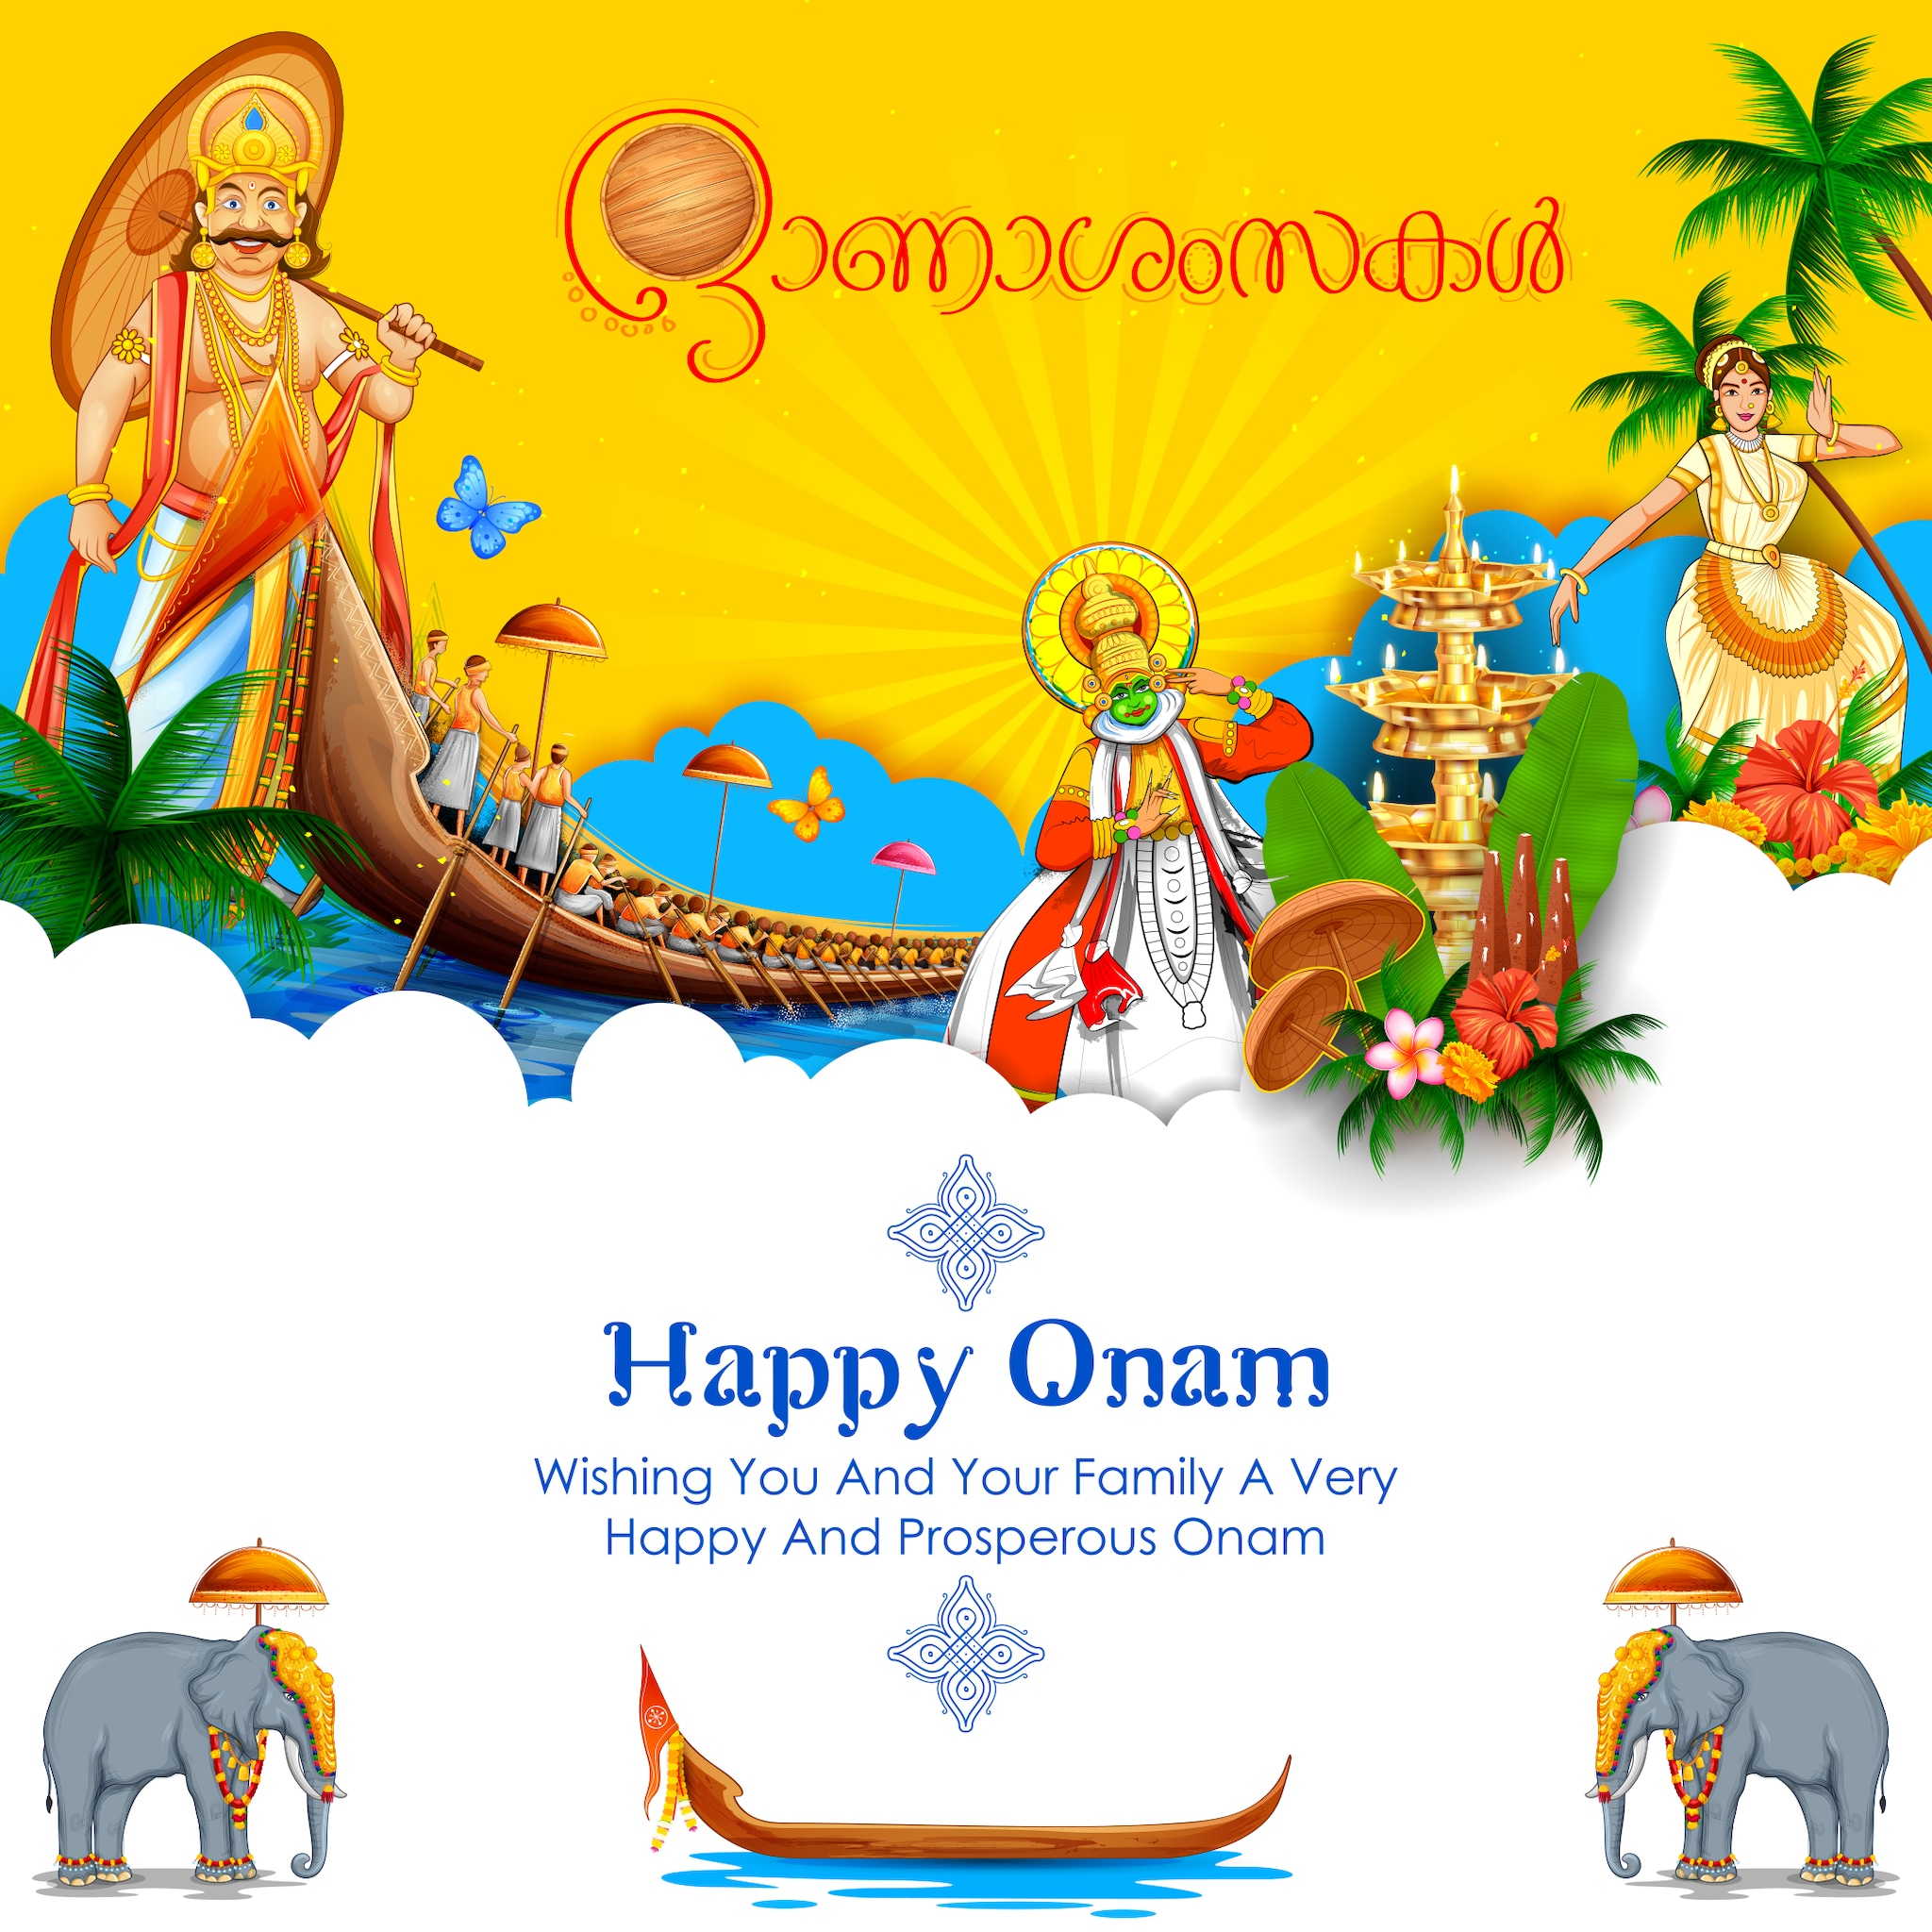 Happy Onam 2022: Images, wishes, quotes, messages and WhatsApp greetings to share. (Image: Shutterstock)